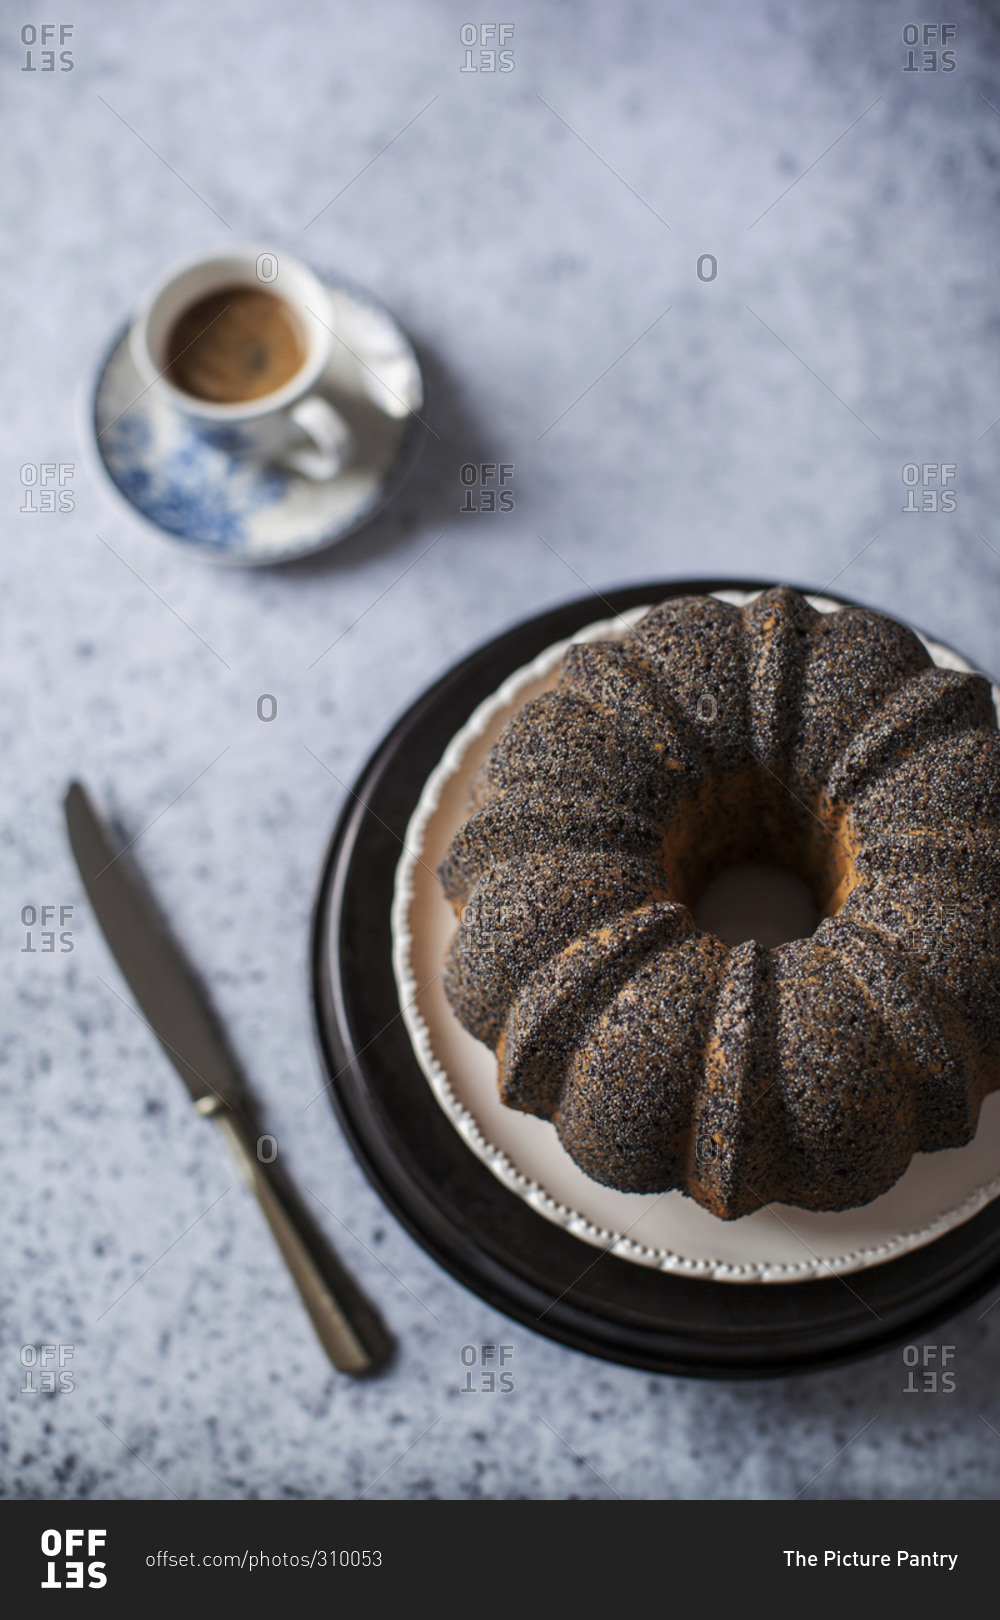 Lime poppy seed cake with a cup of coffee